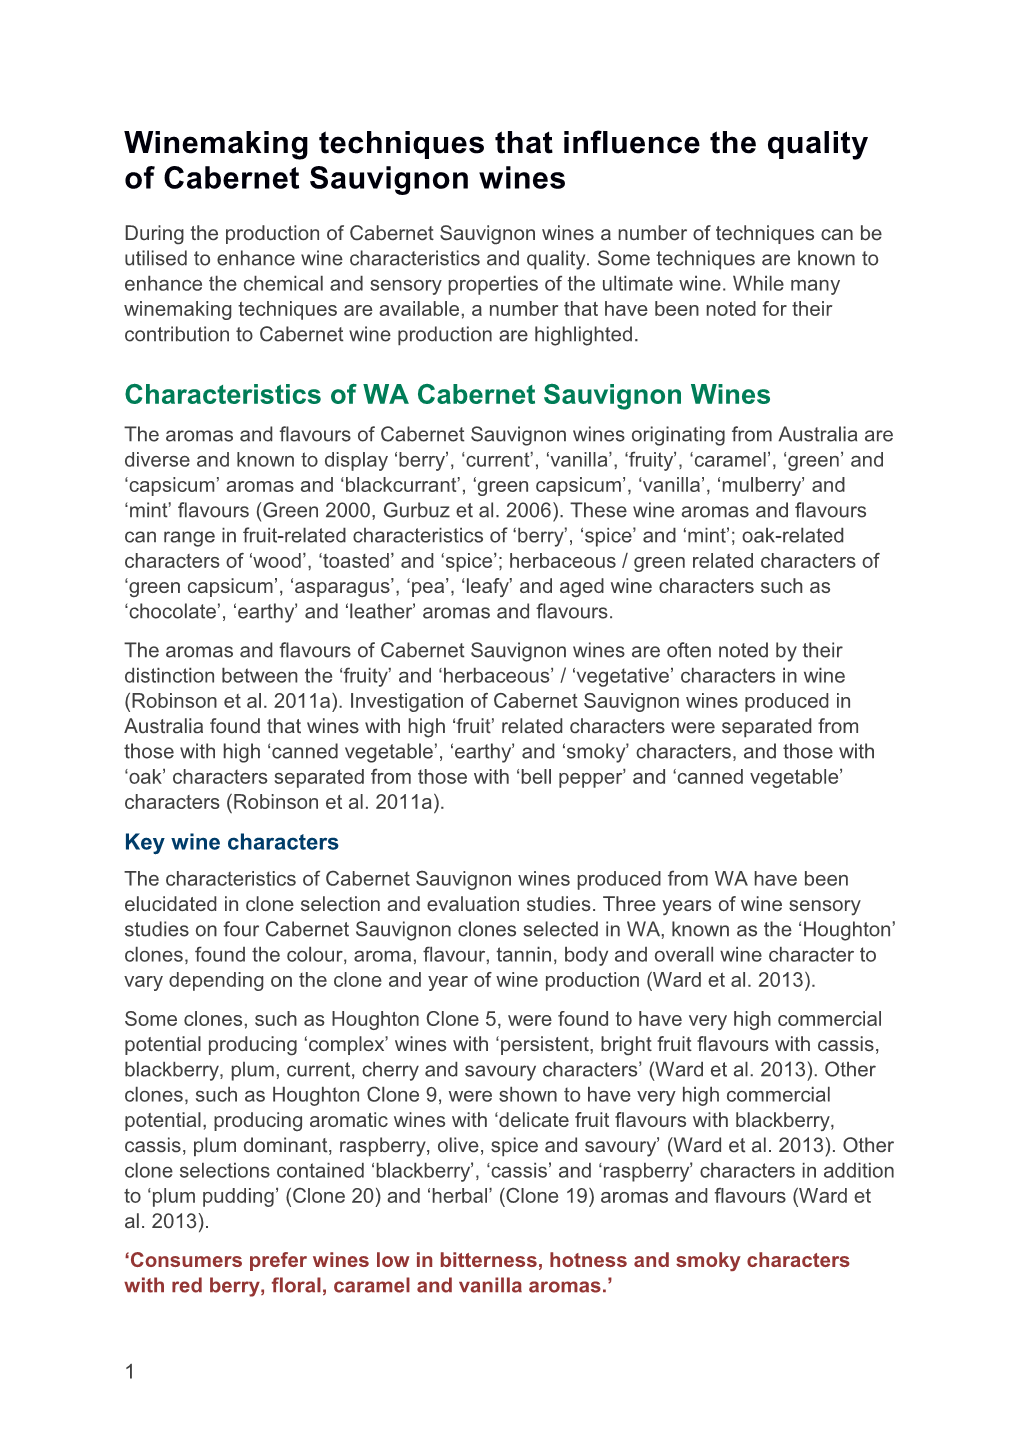 Winemaking Techniquesthat Influence the Quality of Cabernet Sauvignon Wines